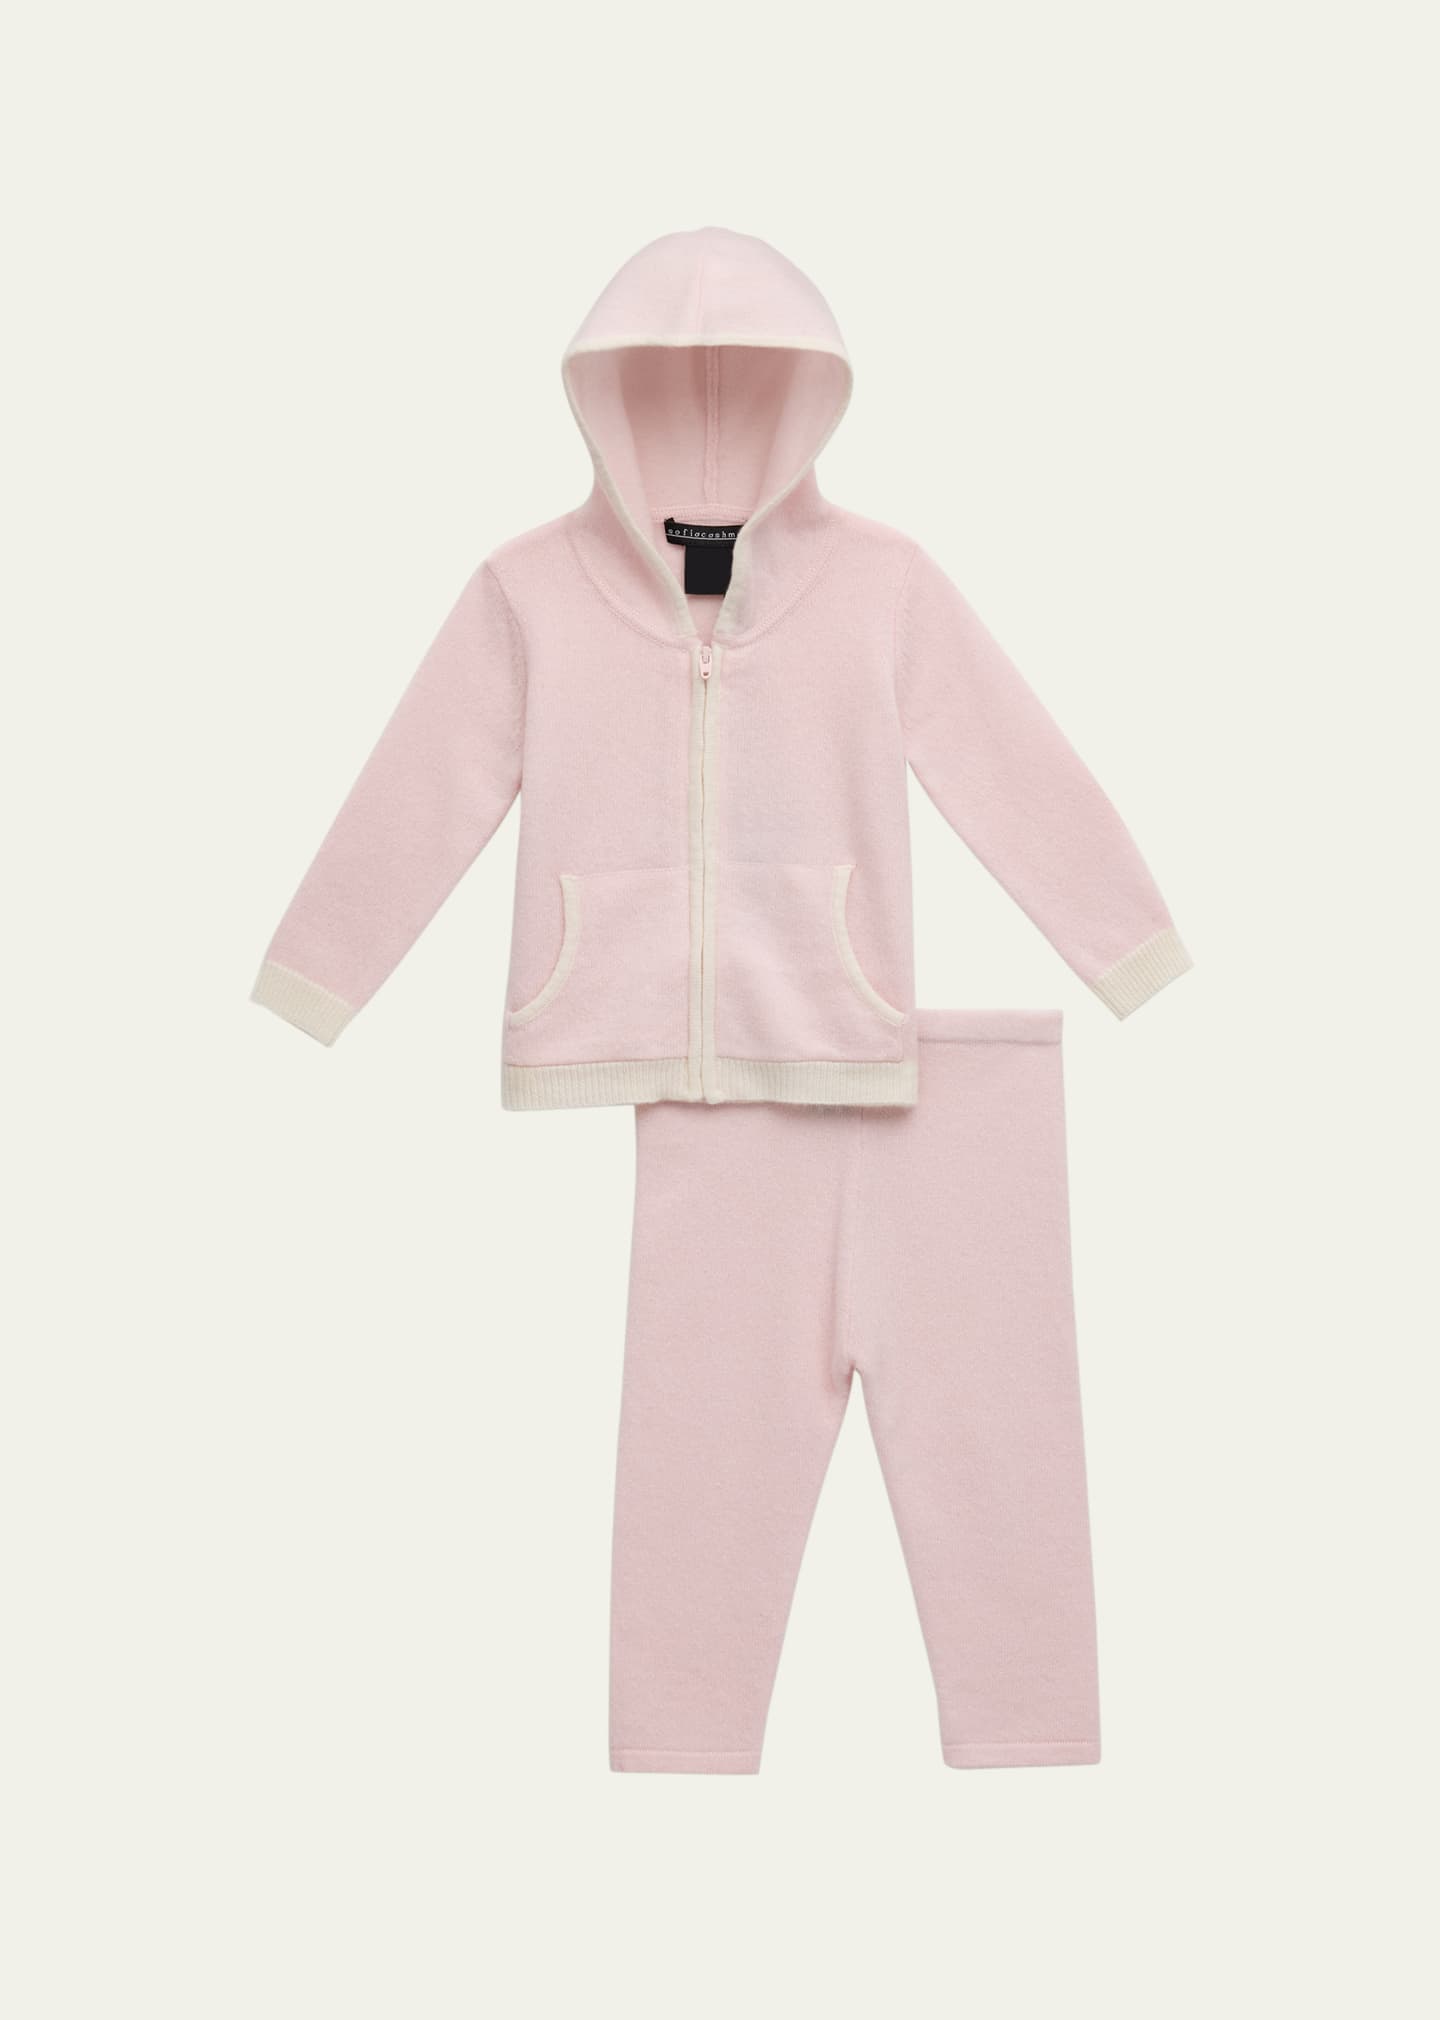 Shop Sofia Cashmere Kid's Cashmere Hoodie And Legging Set In Pink